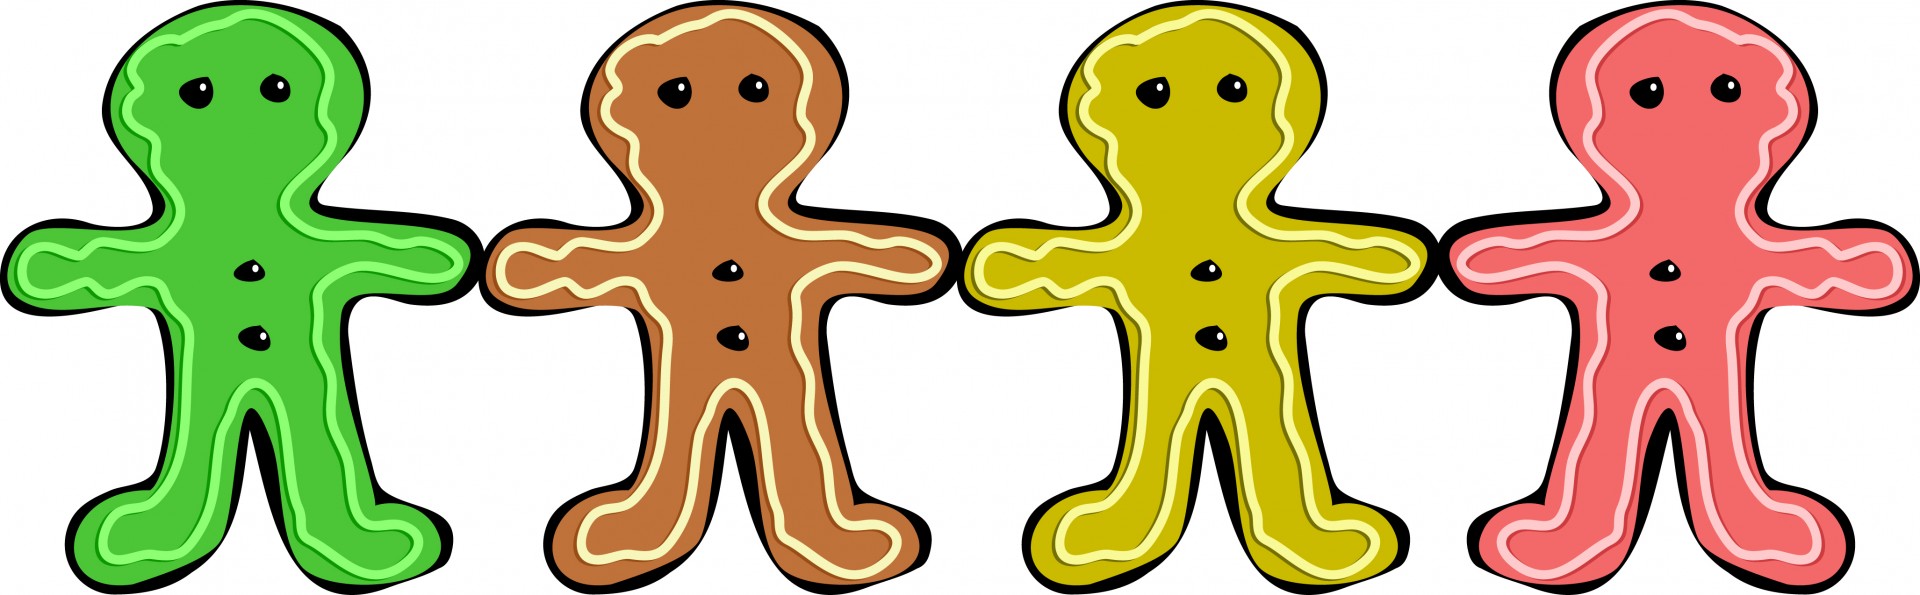 free clipart of a gingerbread man - photo #40